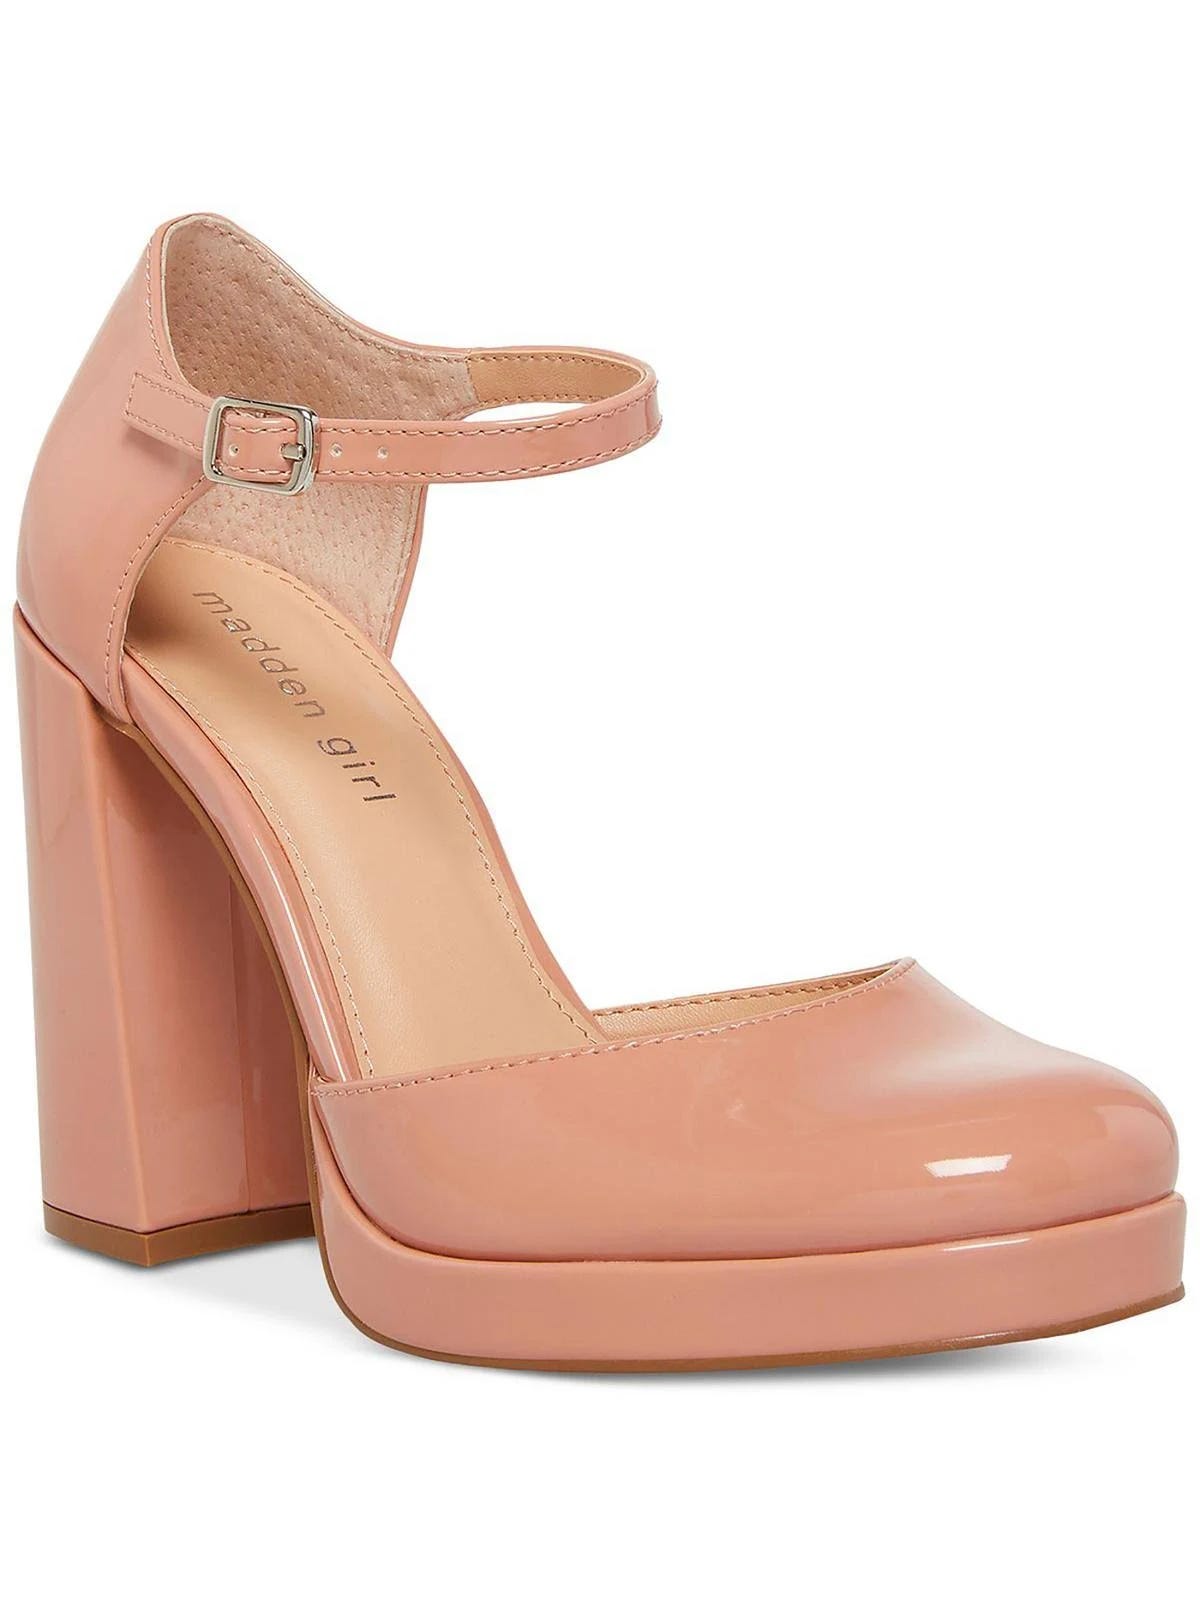 Platform Heels by Madden Girl: All-Day Comfort and Versatile Styling | Image